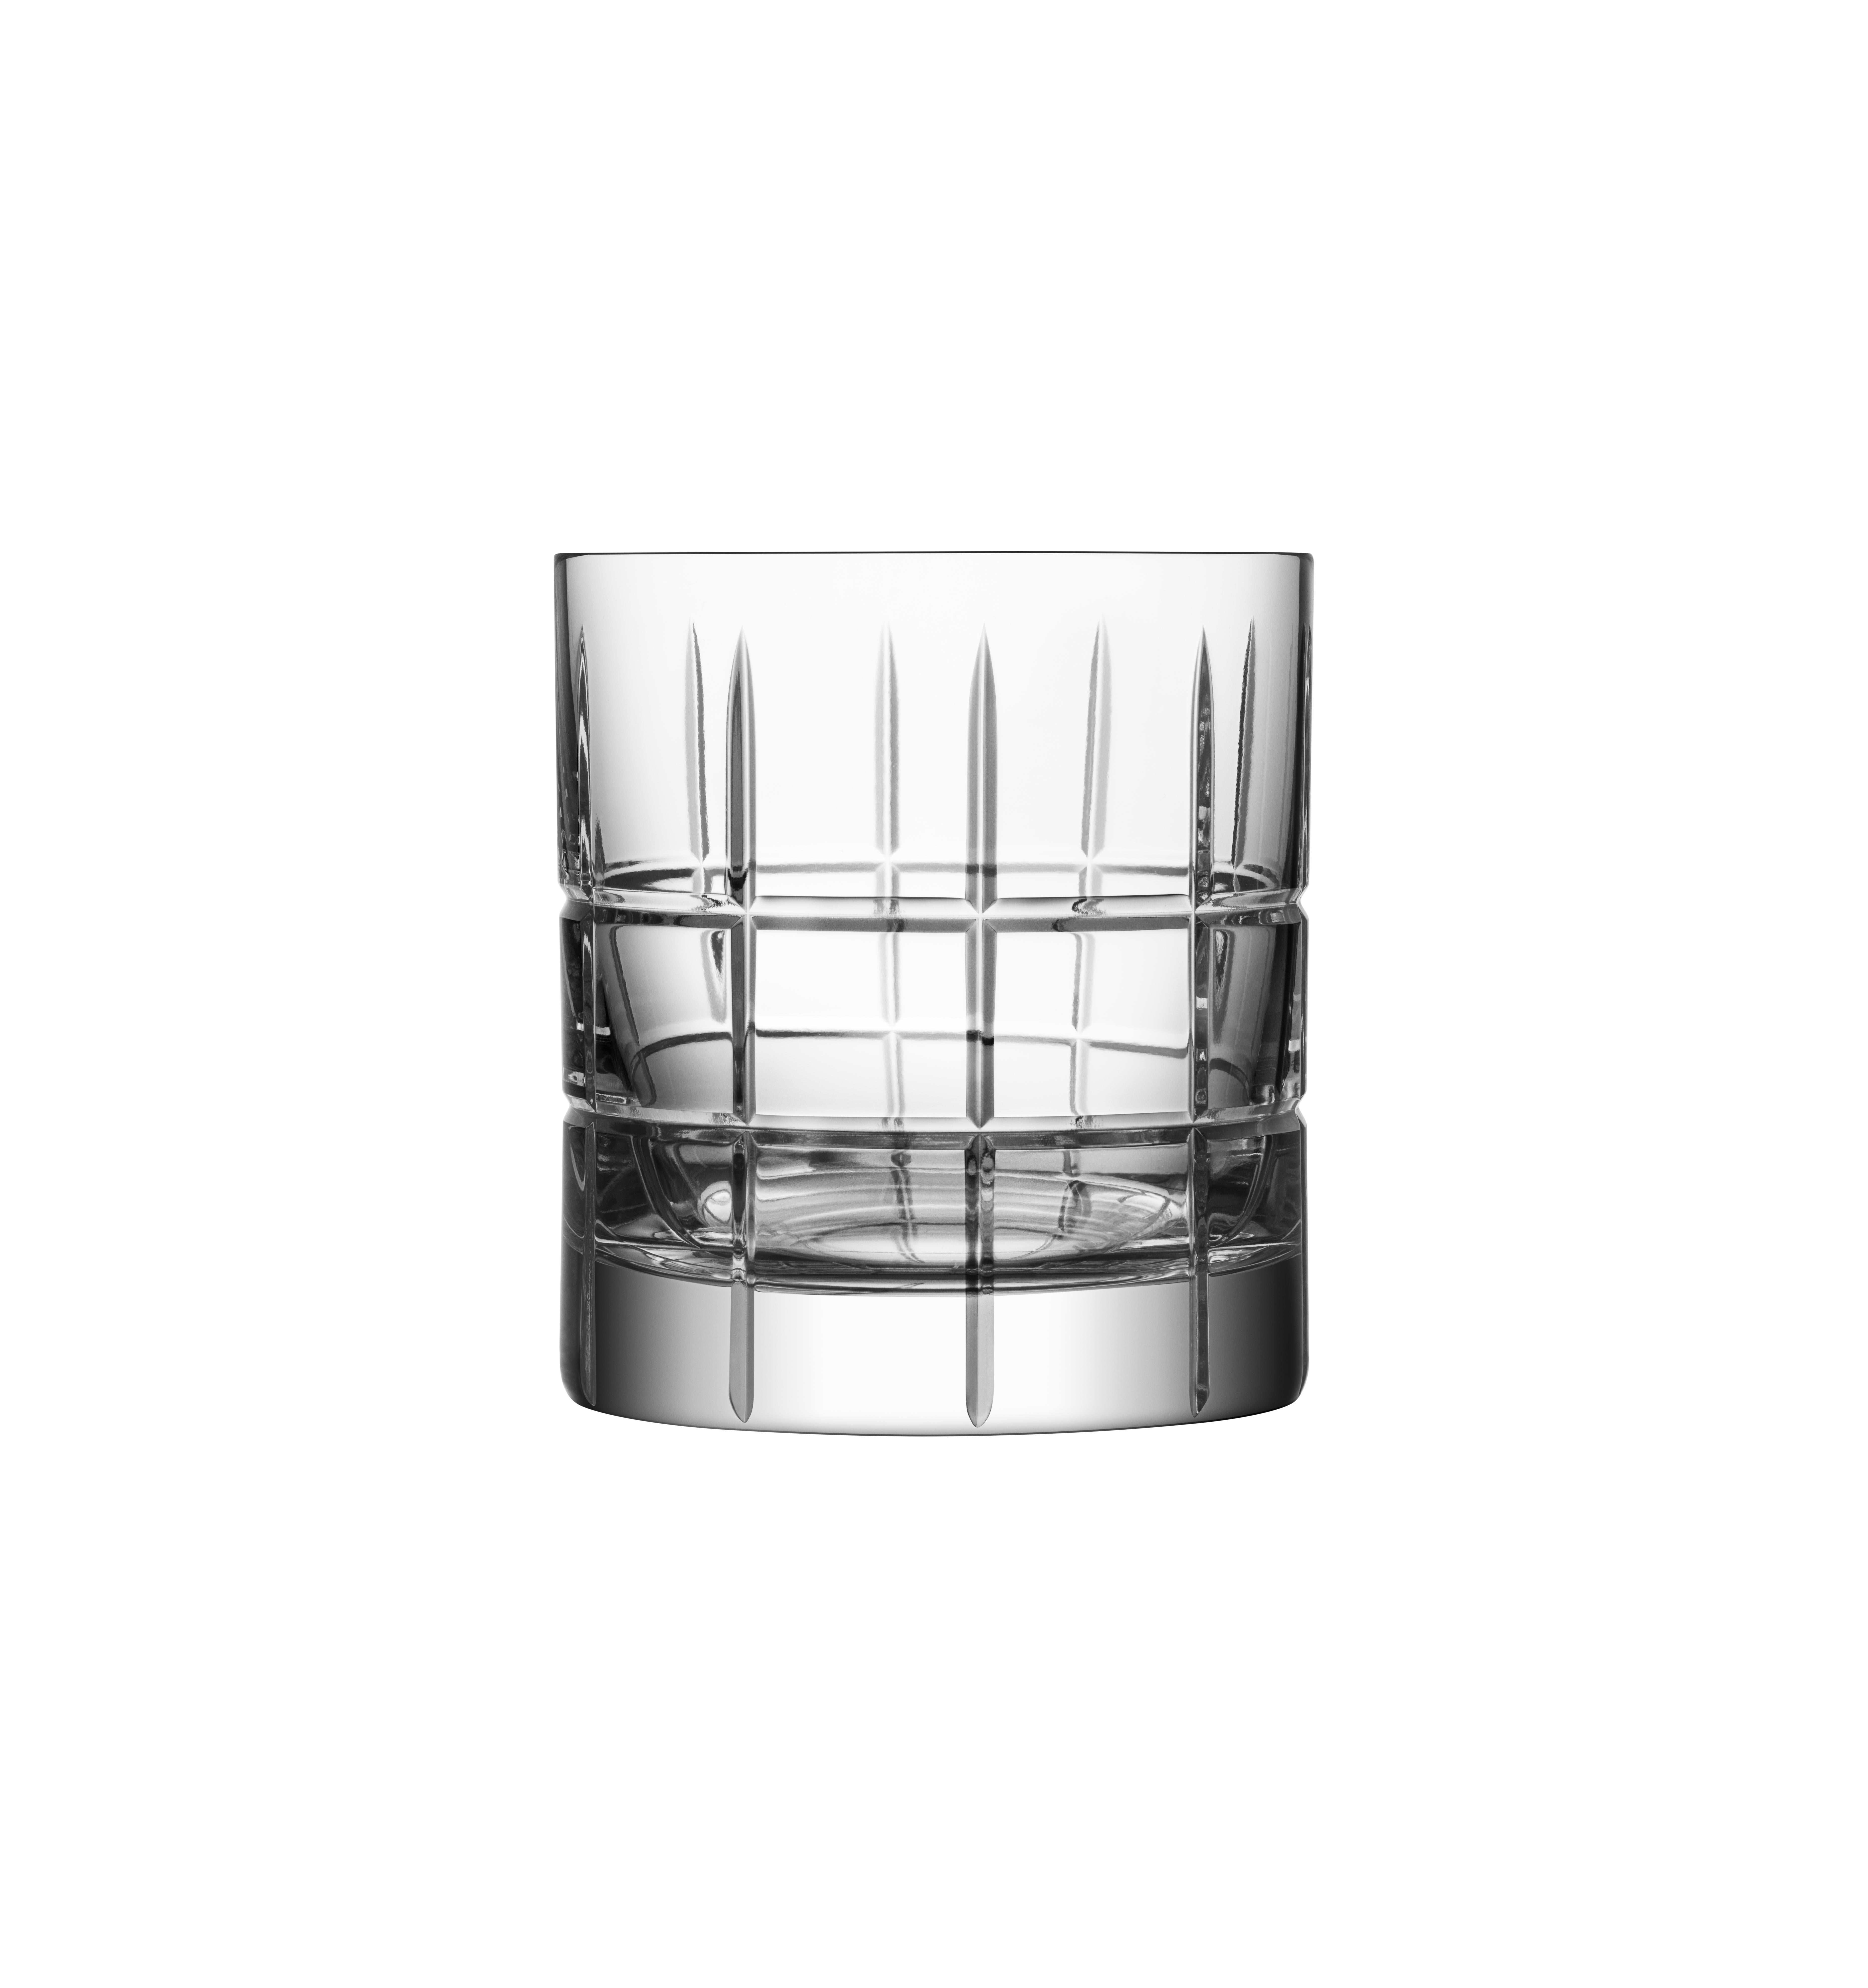 Street Old Fashioned from Orrefors, which holds 8 oz, is ideal for serving spirits or cocktails. The OF glass has a checked motif of straight lines inspired by the criss-cross streets and avenues of Manhattan, New York. Use the lowest cut on Street